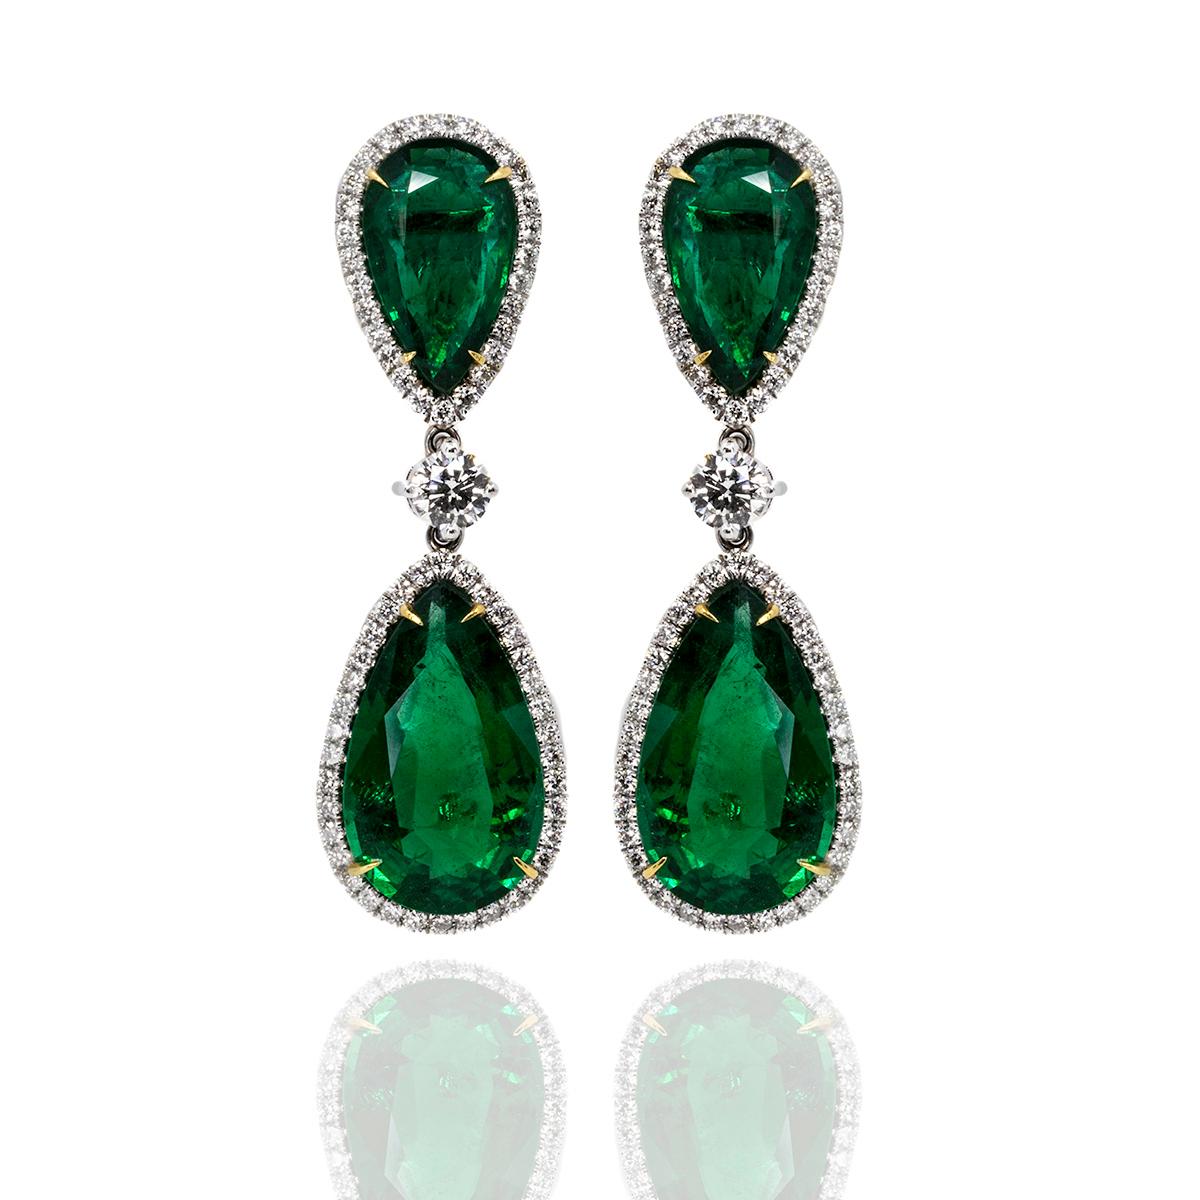 18k White gold earrings with 4 top gem quality pear shape GIA certified emeralds weighing 31.55 carats and 2.83 carats of collection color/clarity round brilliant diamonds.